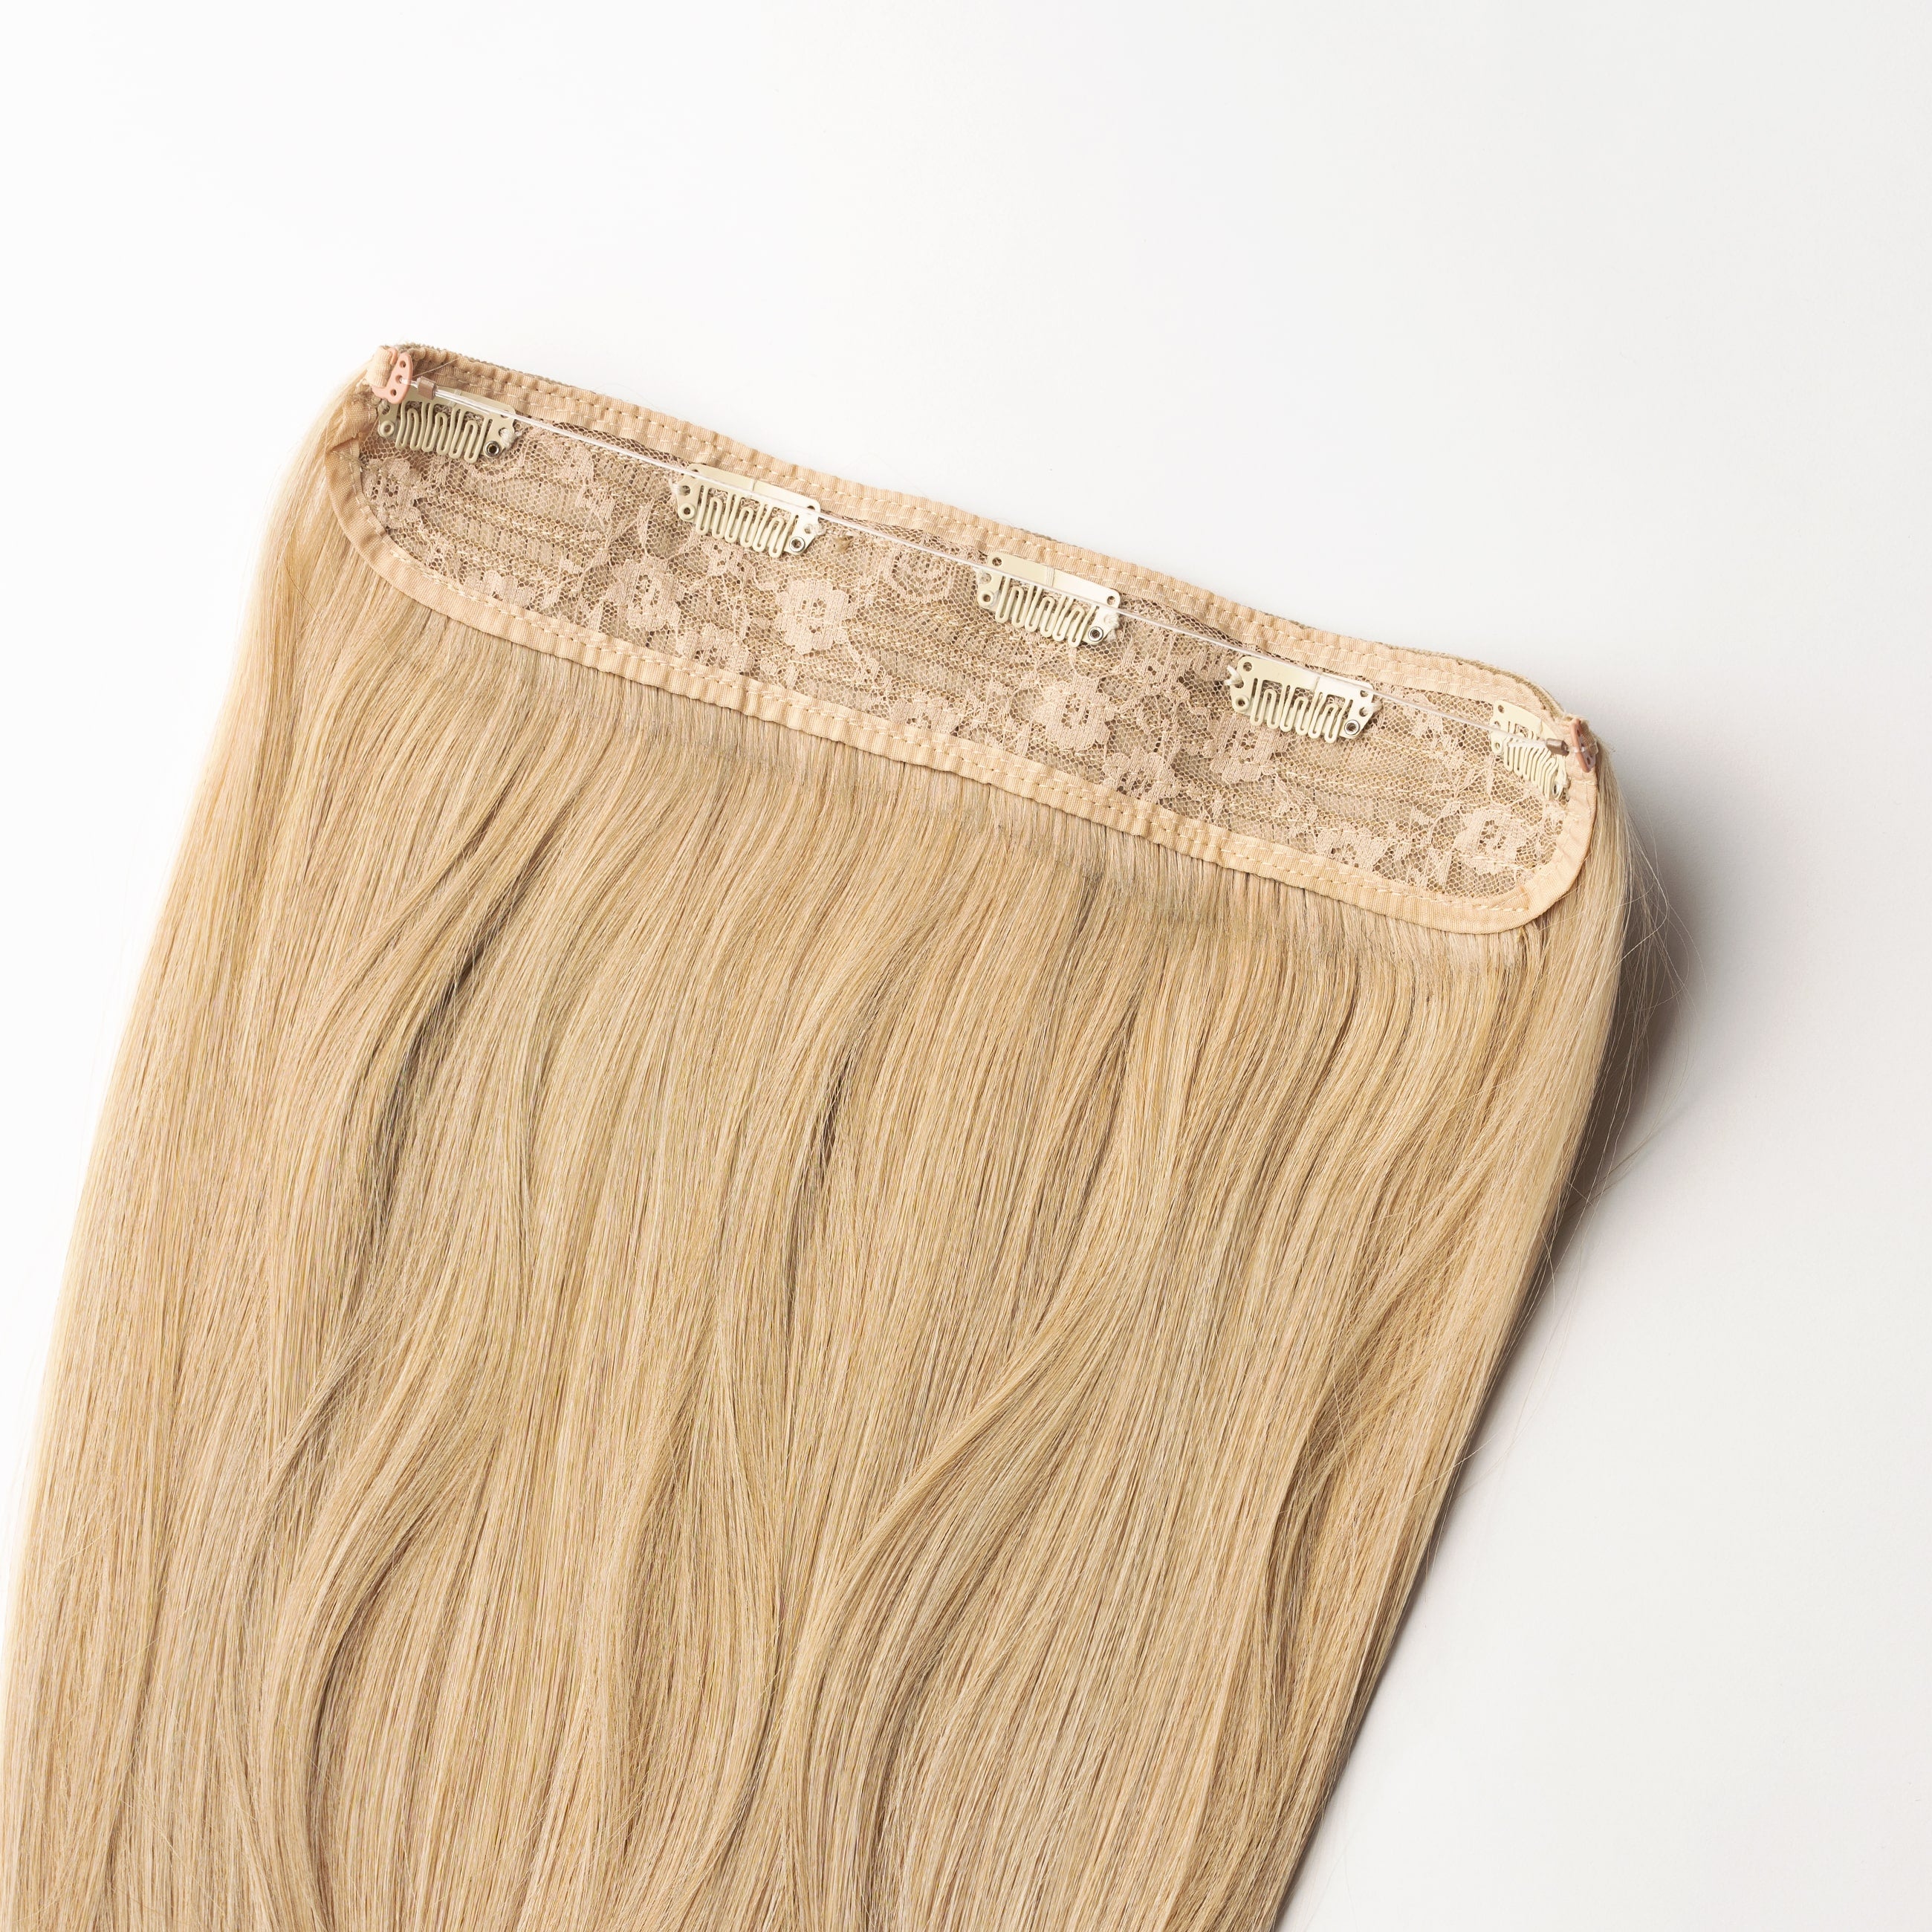 Halo hair extensions - Natural Blonde 15